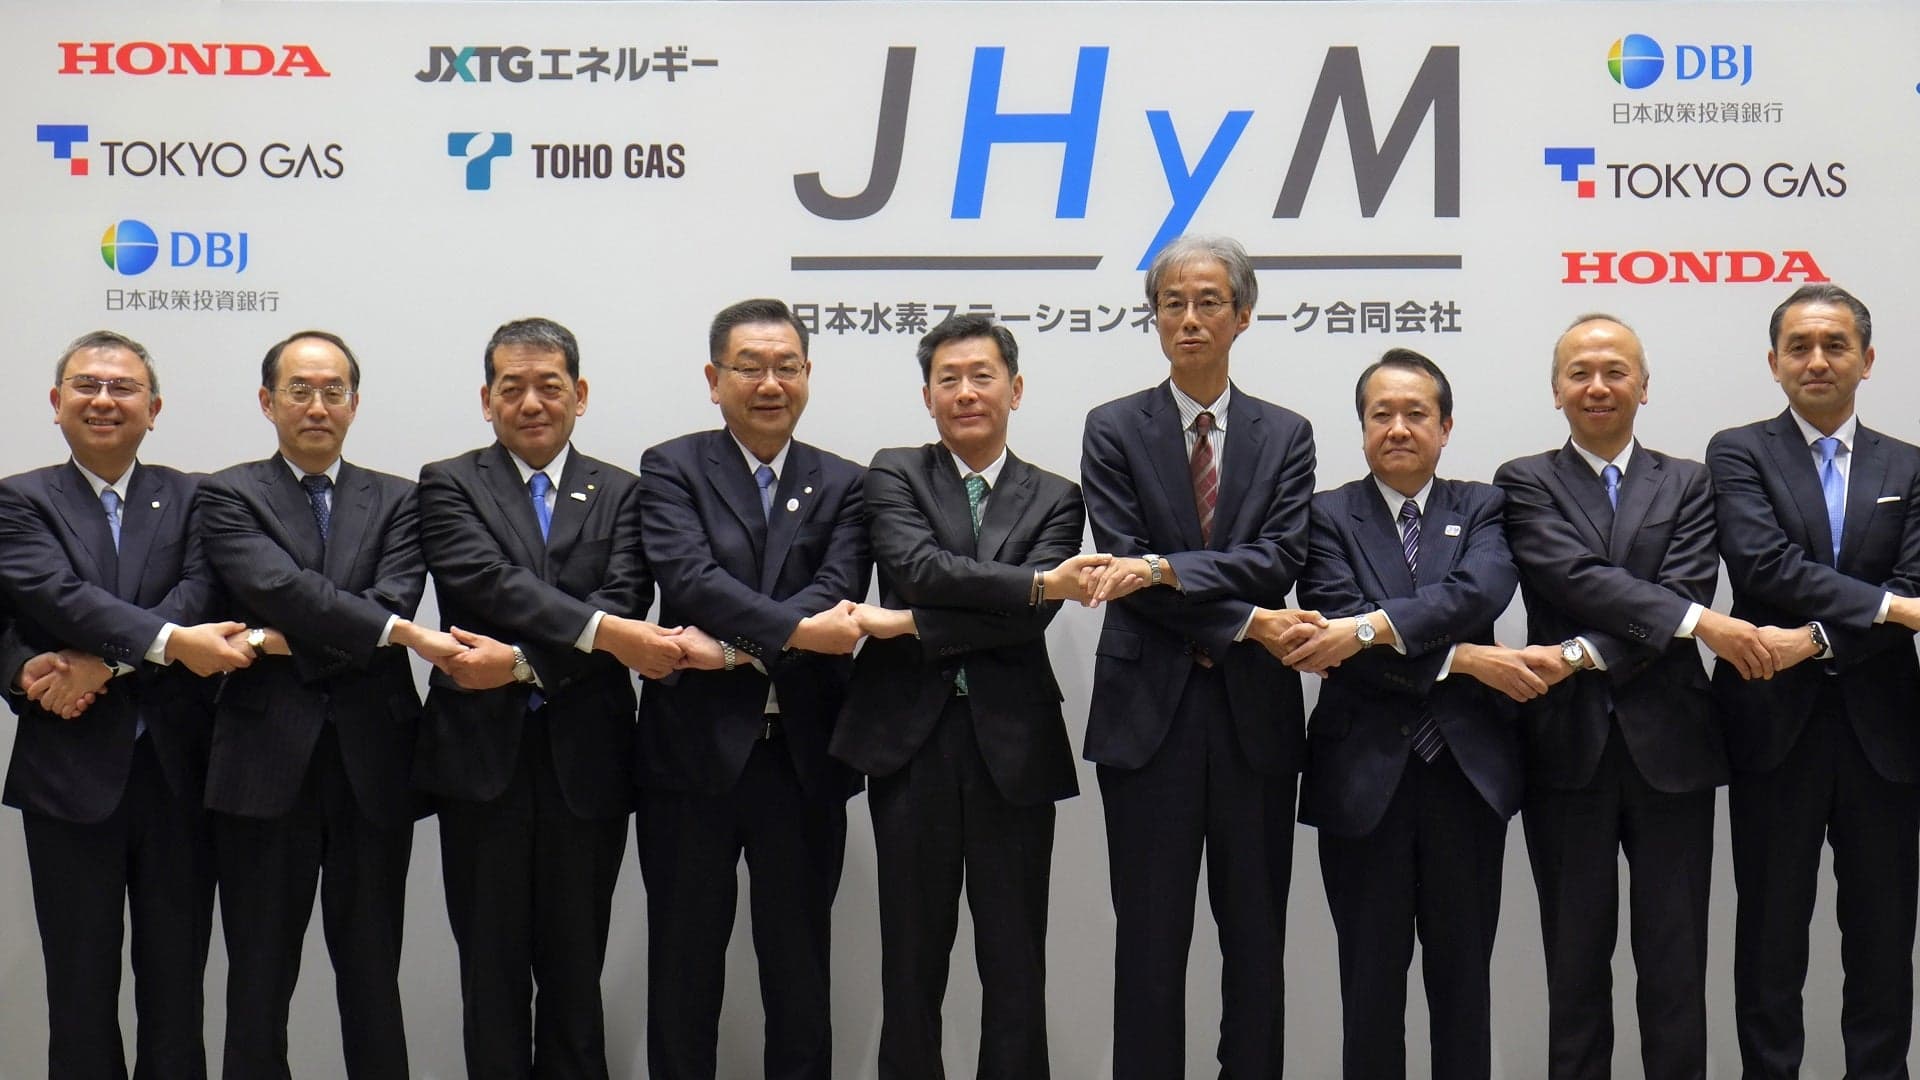 Japan H2 Mobility to Bring Hydrogen Stations to Japan